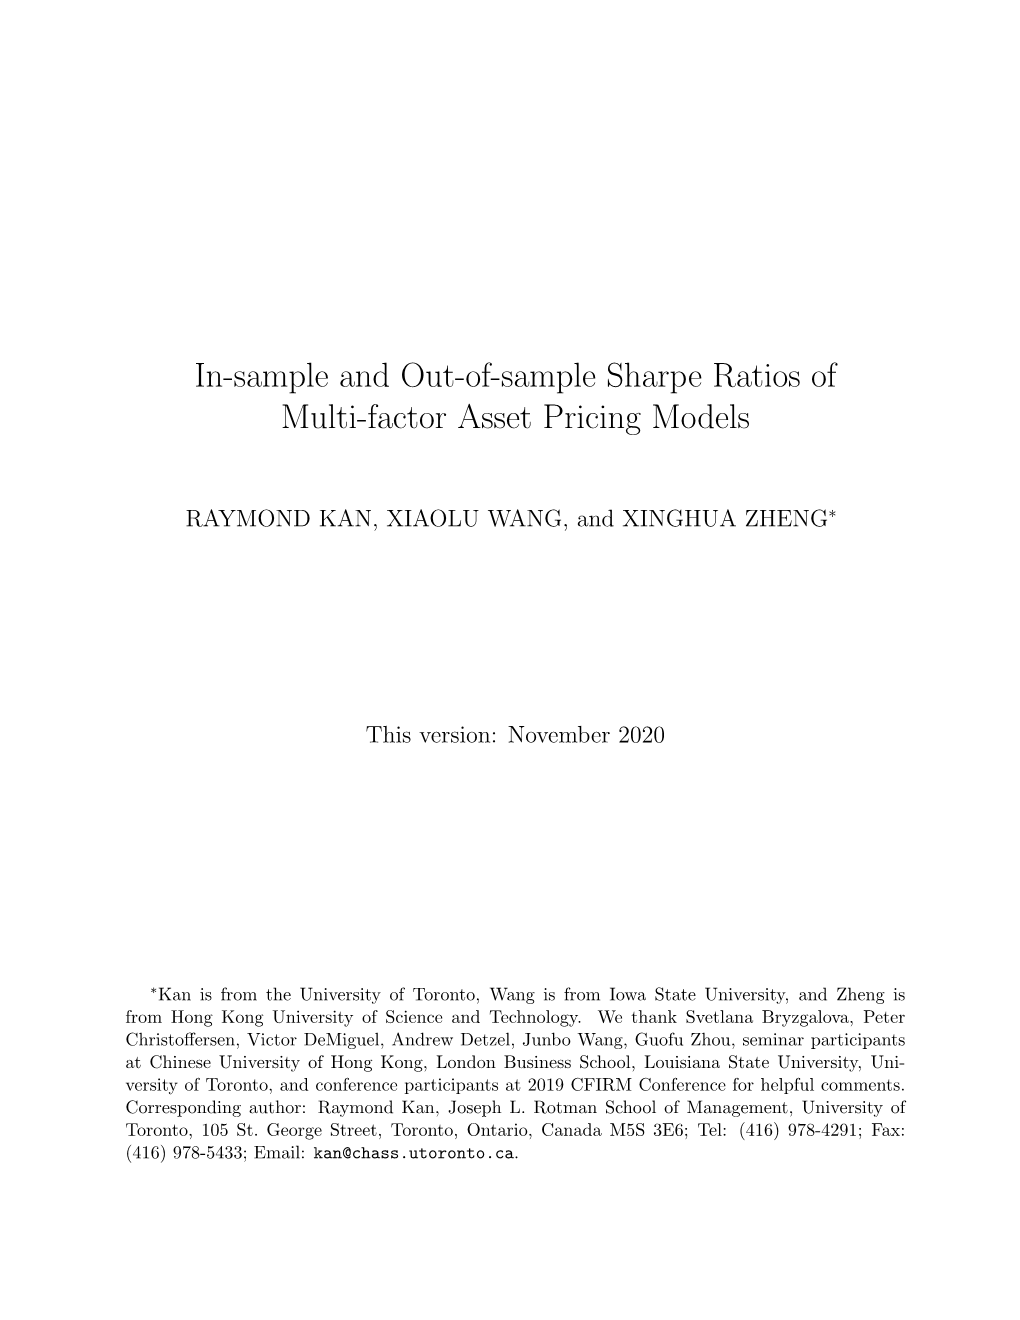 In-Sample and Out-Of-Sample Sharpe Ratios of Multi-Factor Asset Pricing Models